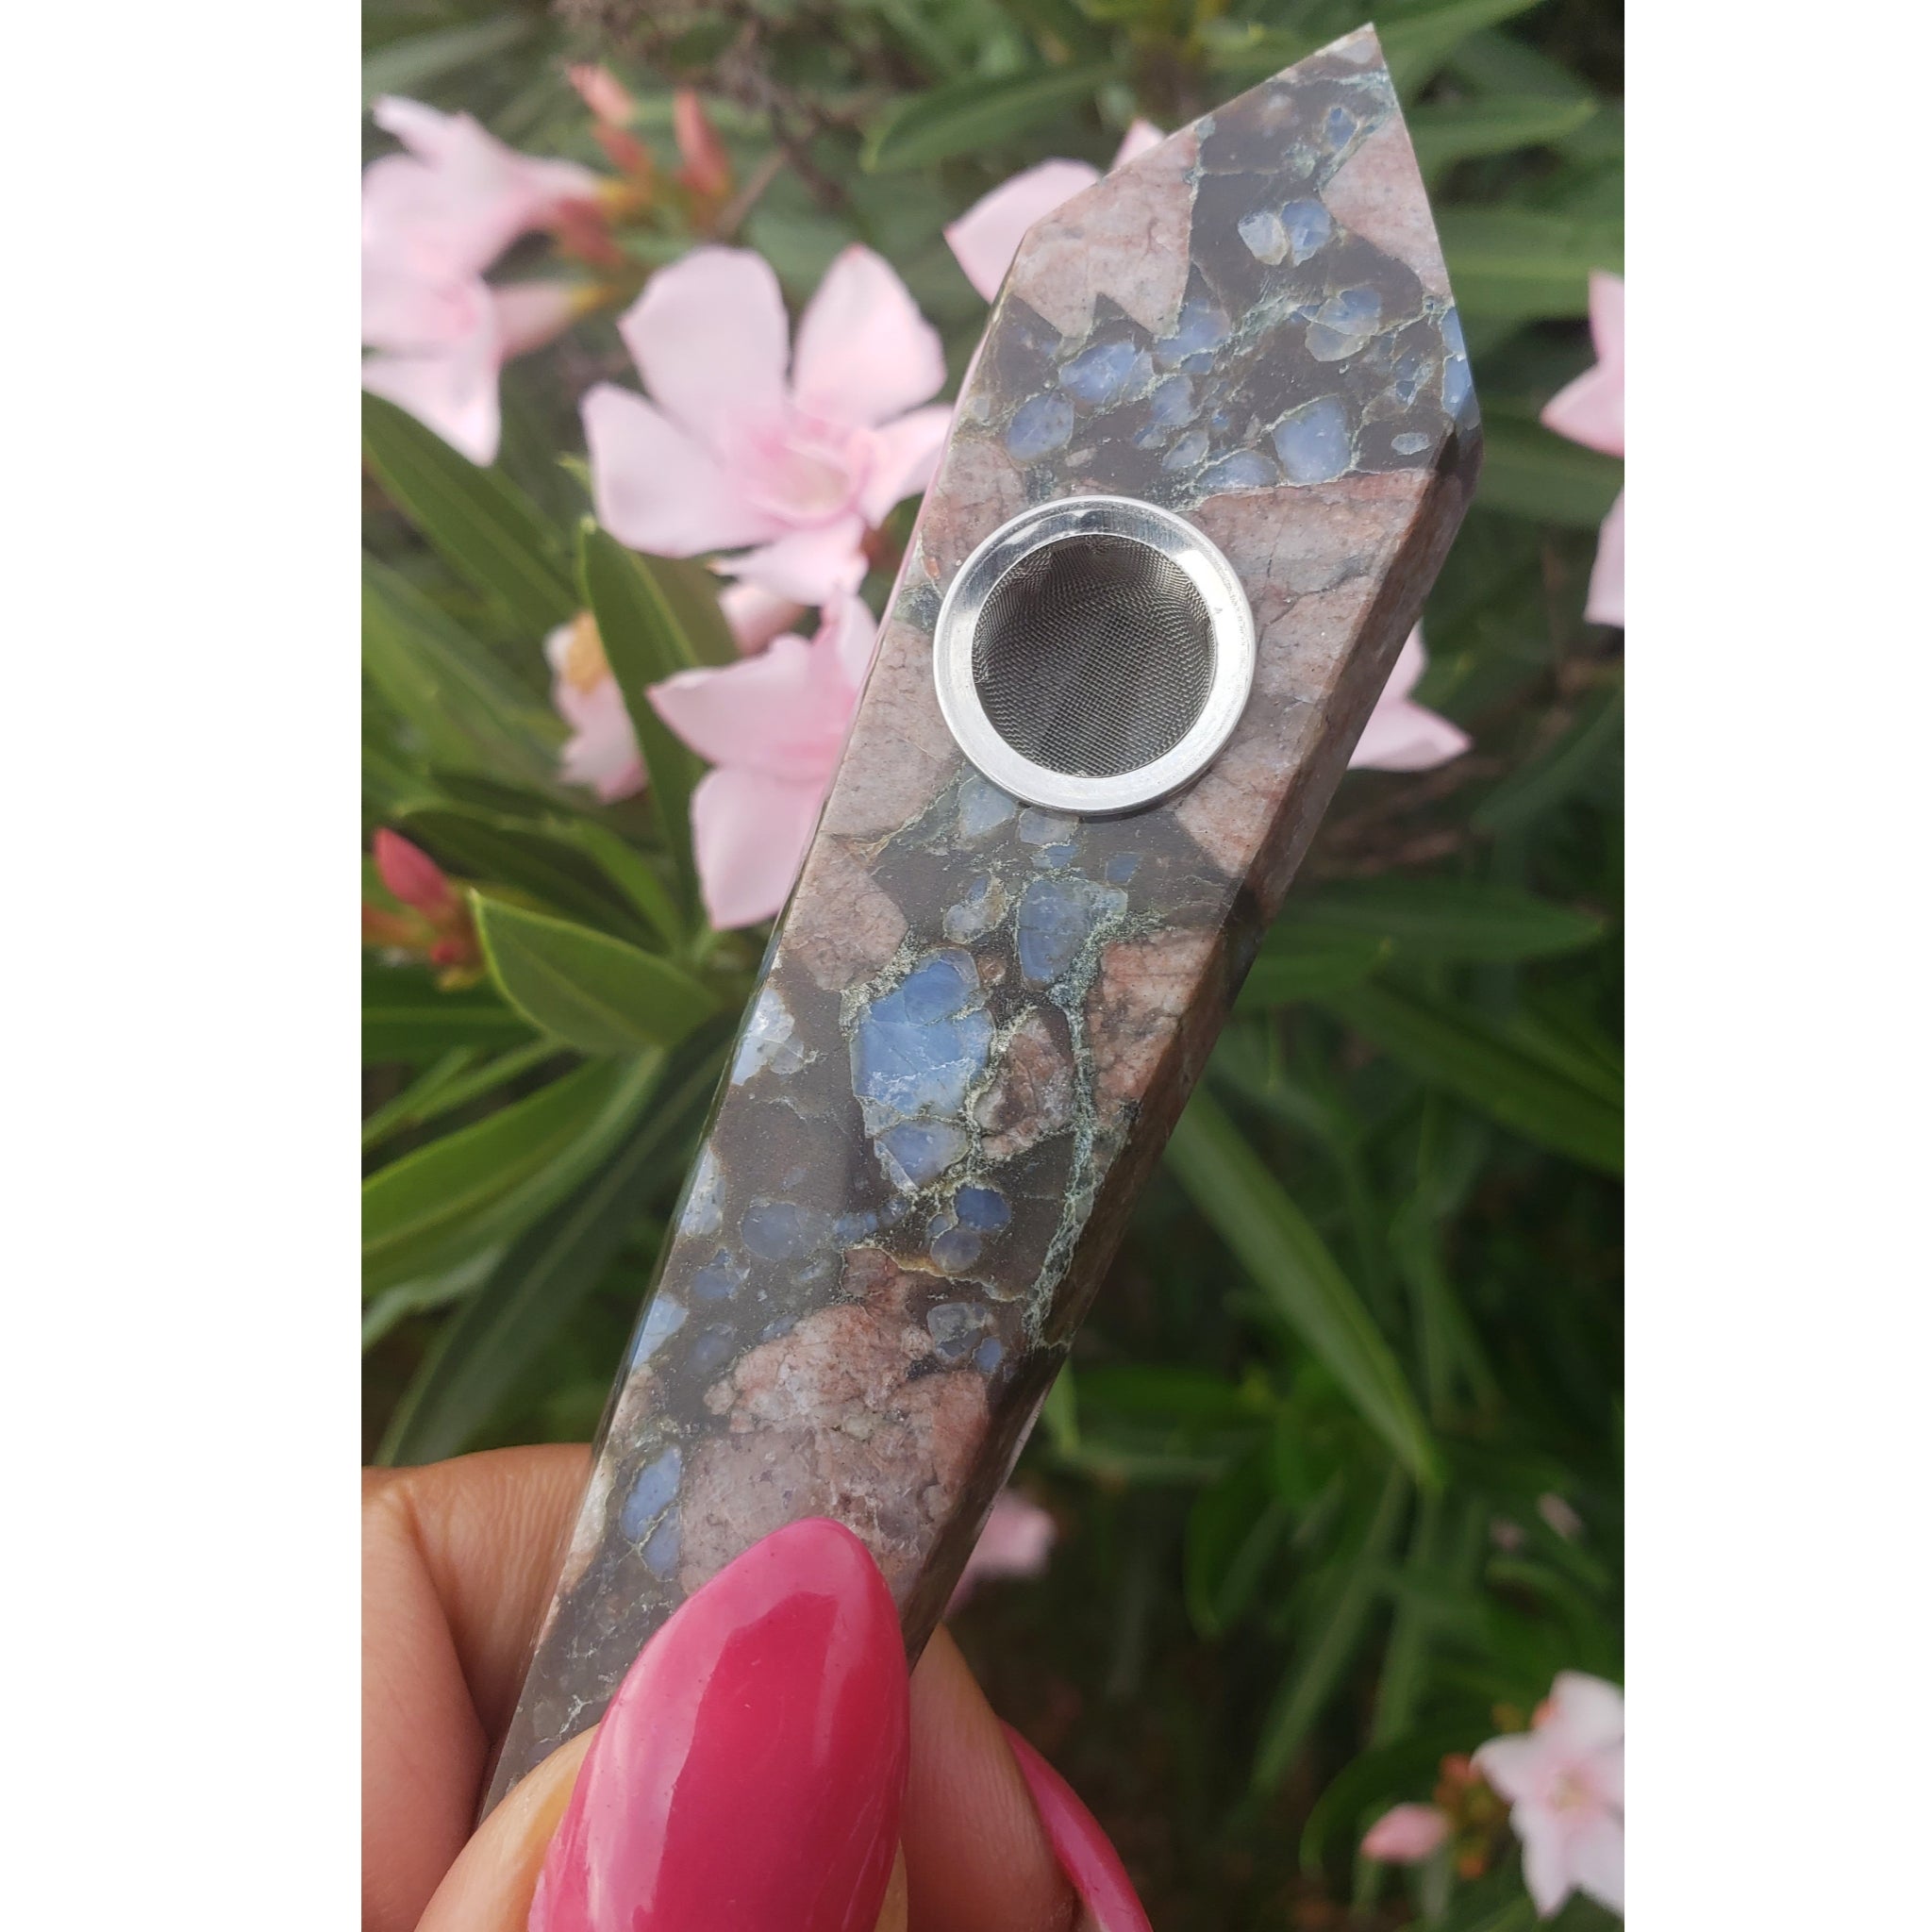 Glaucophane Crystal pipe